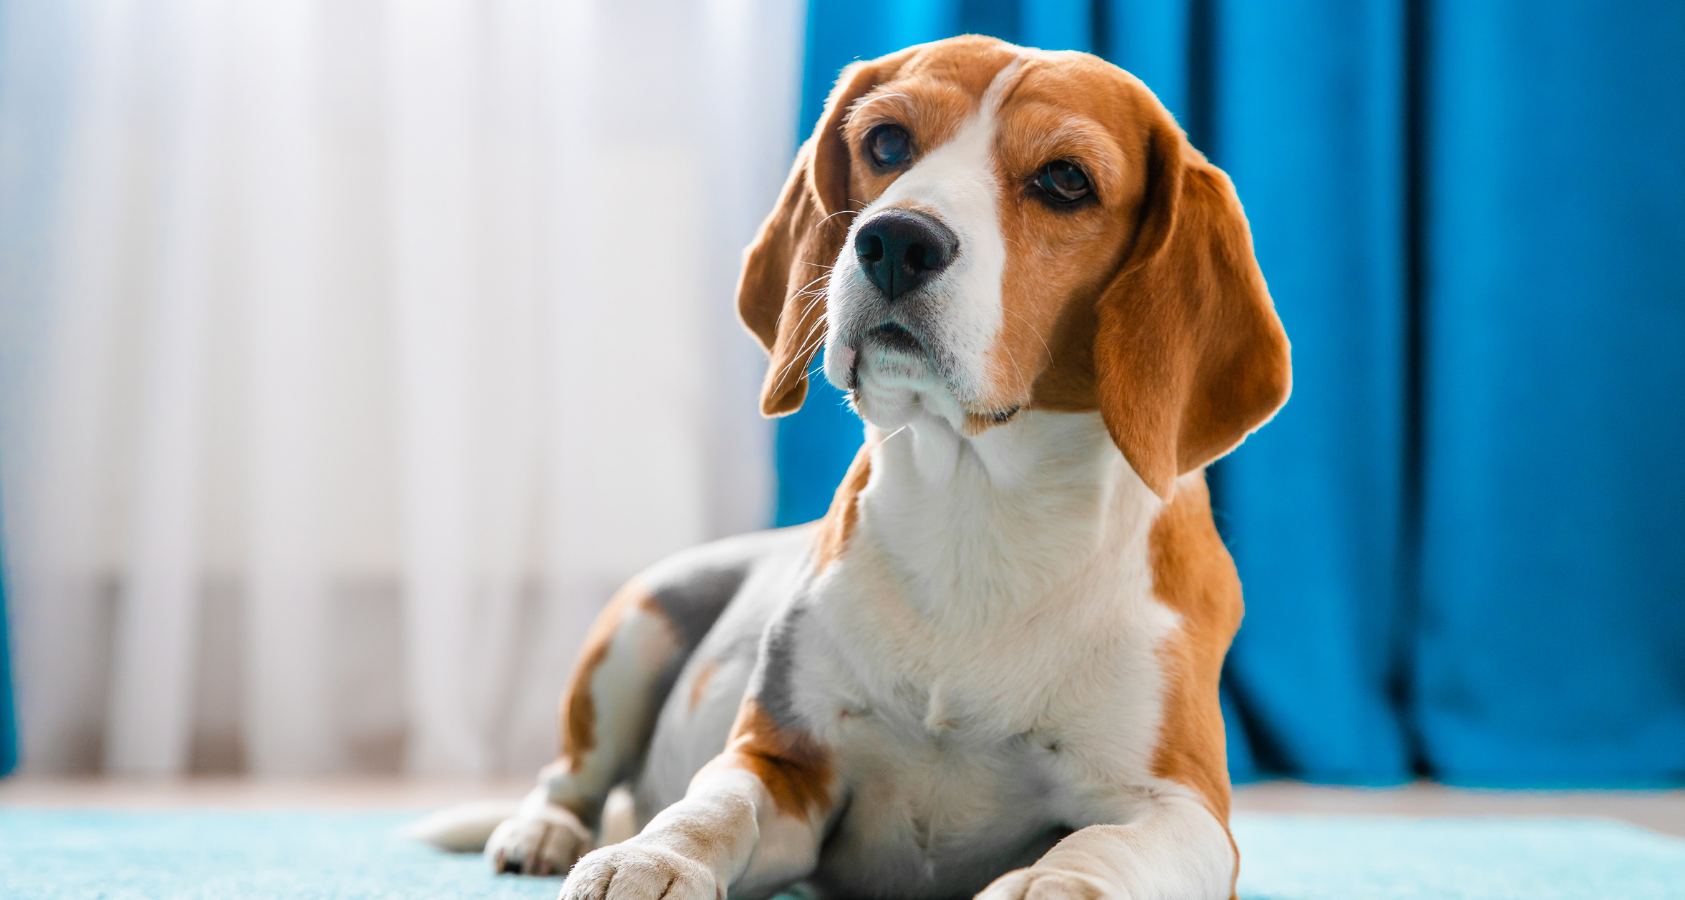 How to Clean Up Dog Diarrhea? Carpet/Floor - Full Guide 